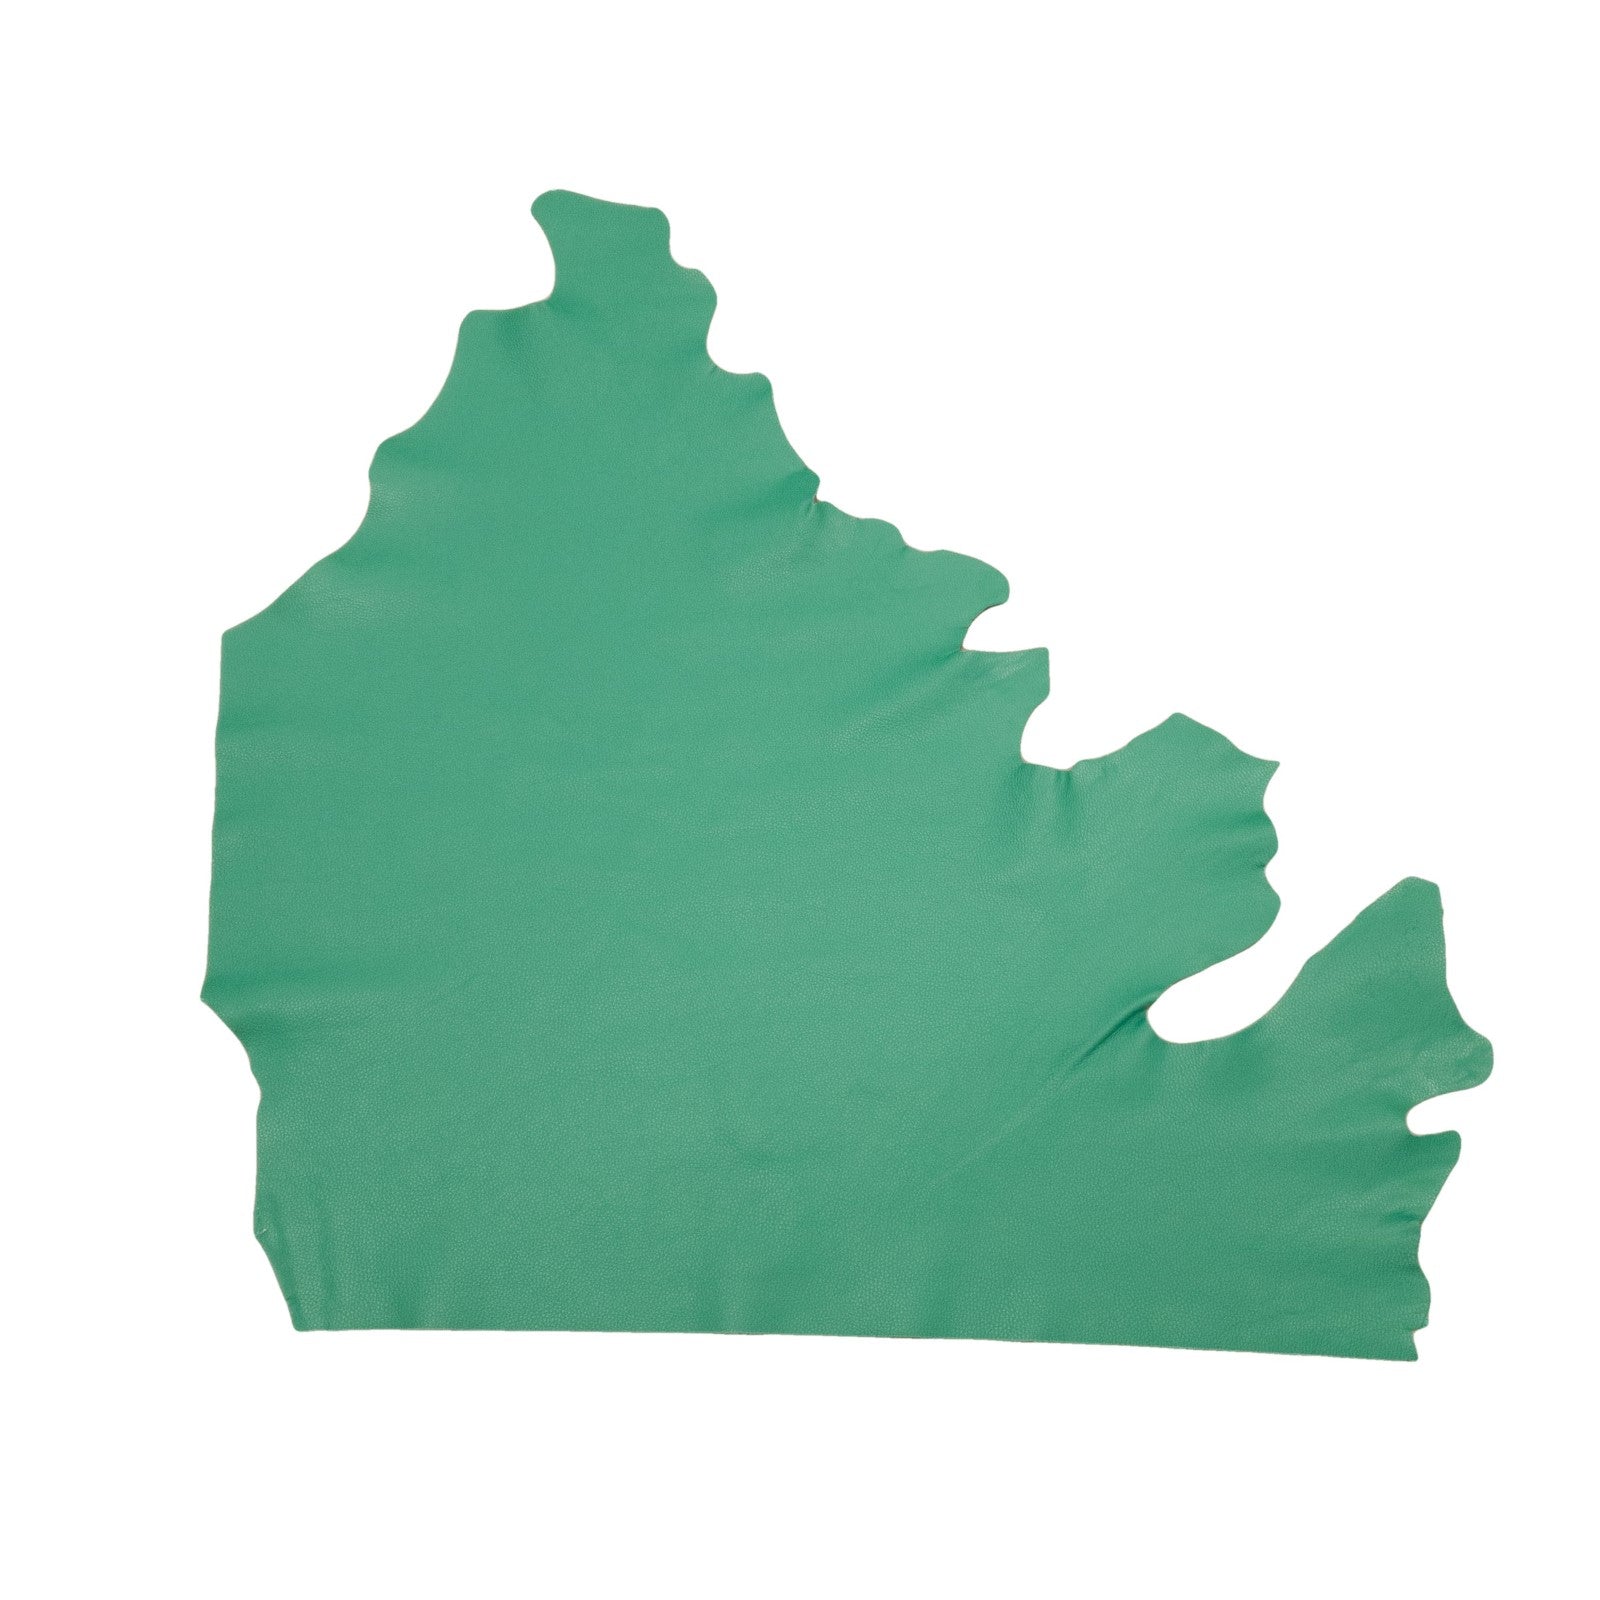 Wisconsin Bay Green, Tried n True, 3-4 oz Leather Cow Hides, 6.5-7.5 Square Foot / Project Piece (Top) | The Leather Guy